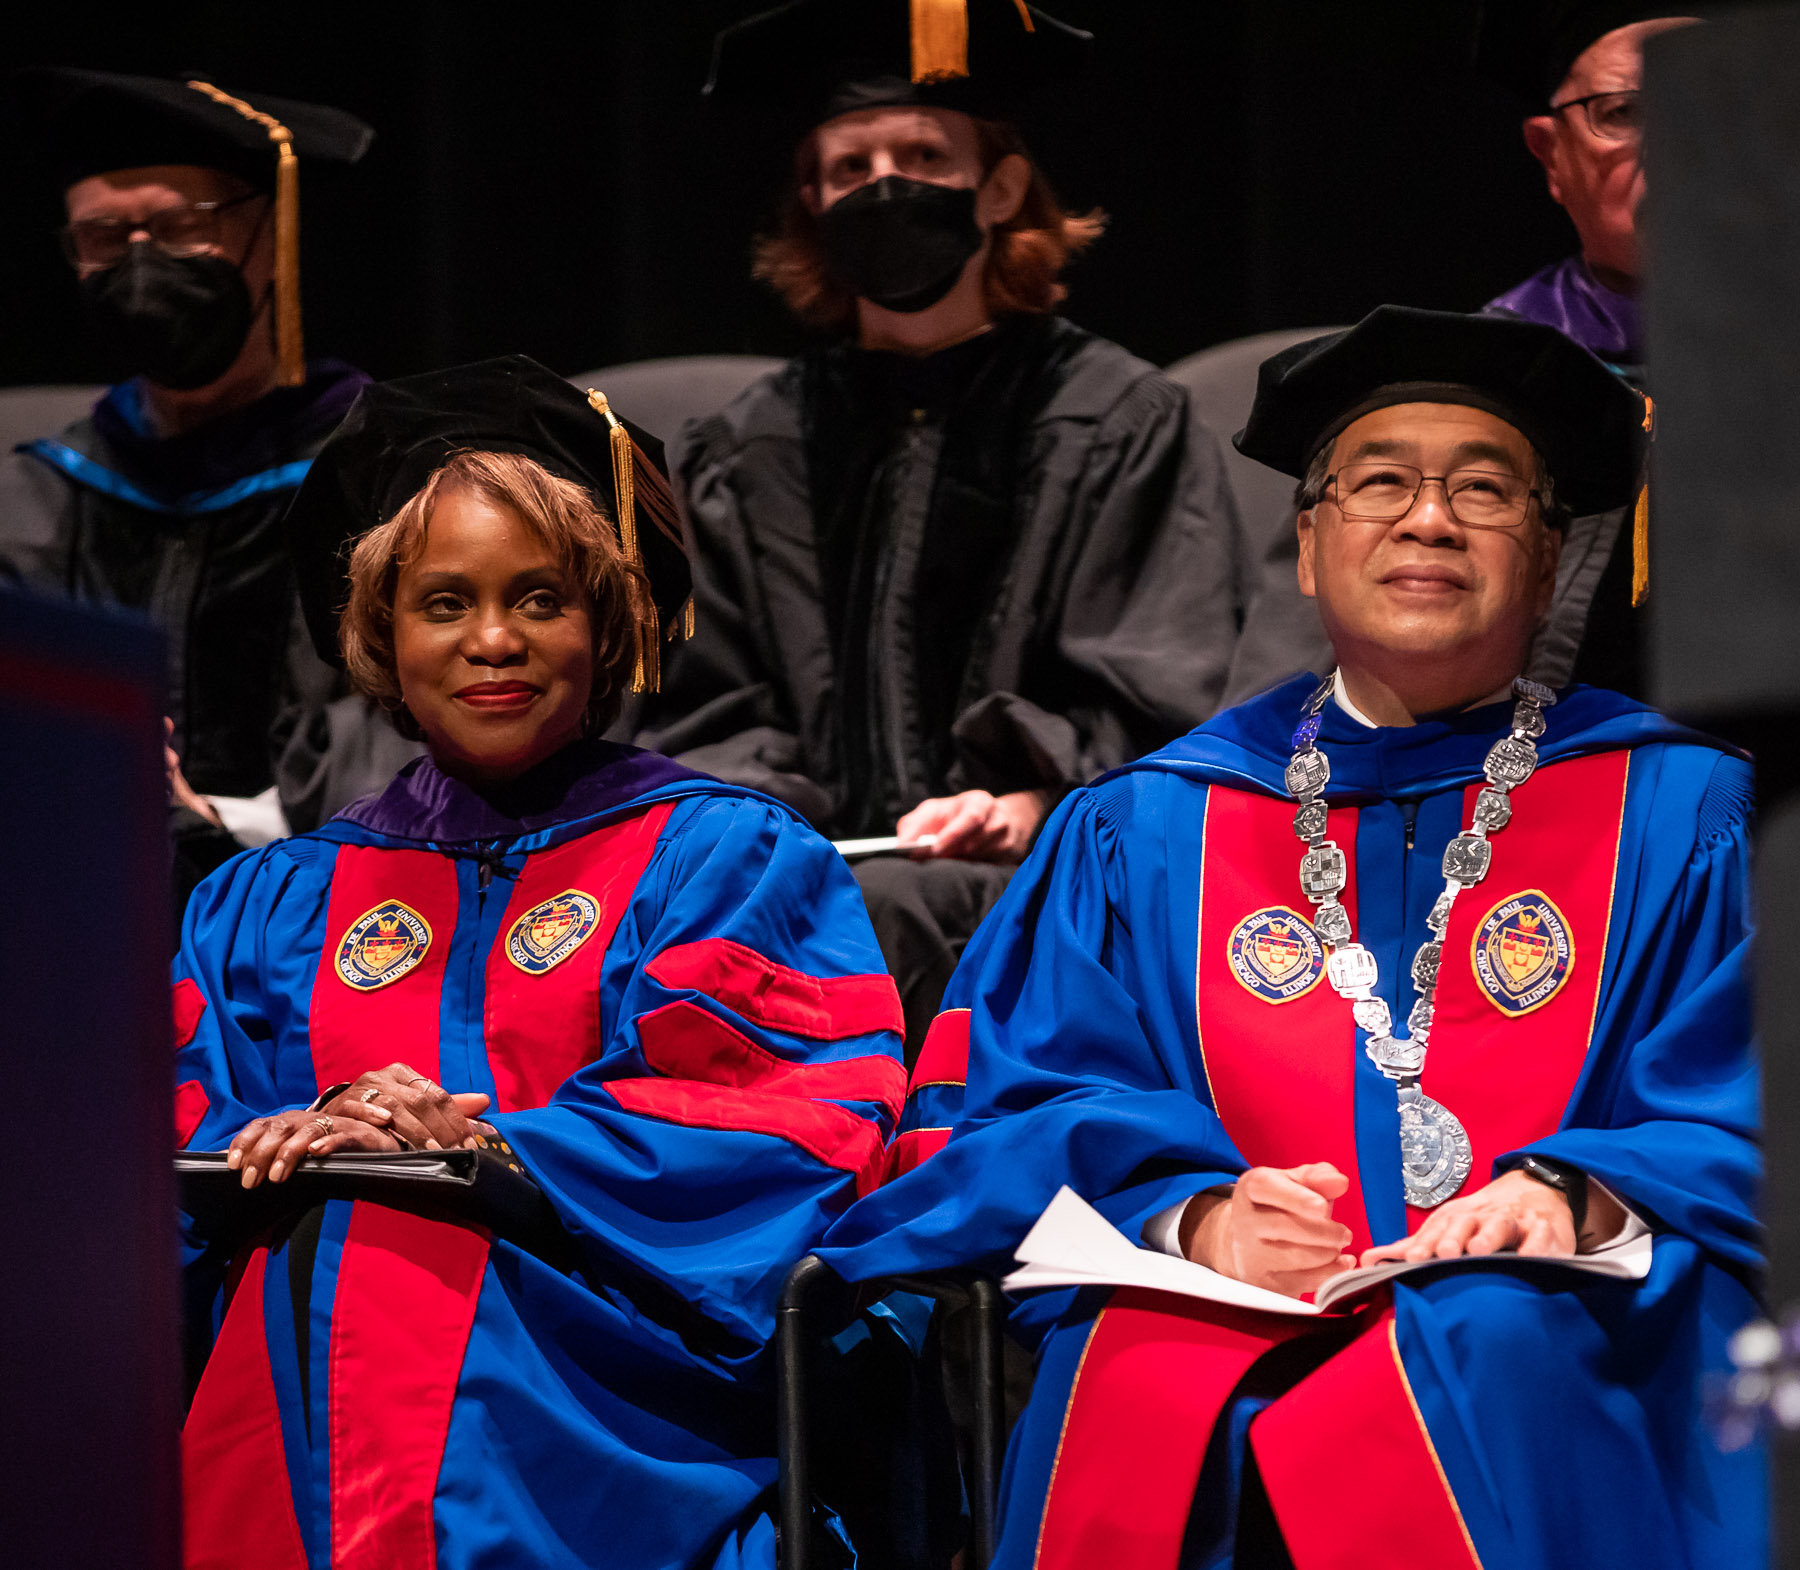 Natalye Paquin, right, and A. Gabriel Esteban, president of DePaul, at the College of Law commencement.